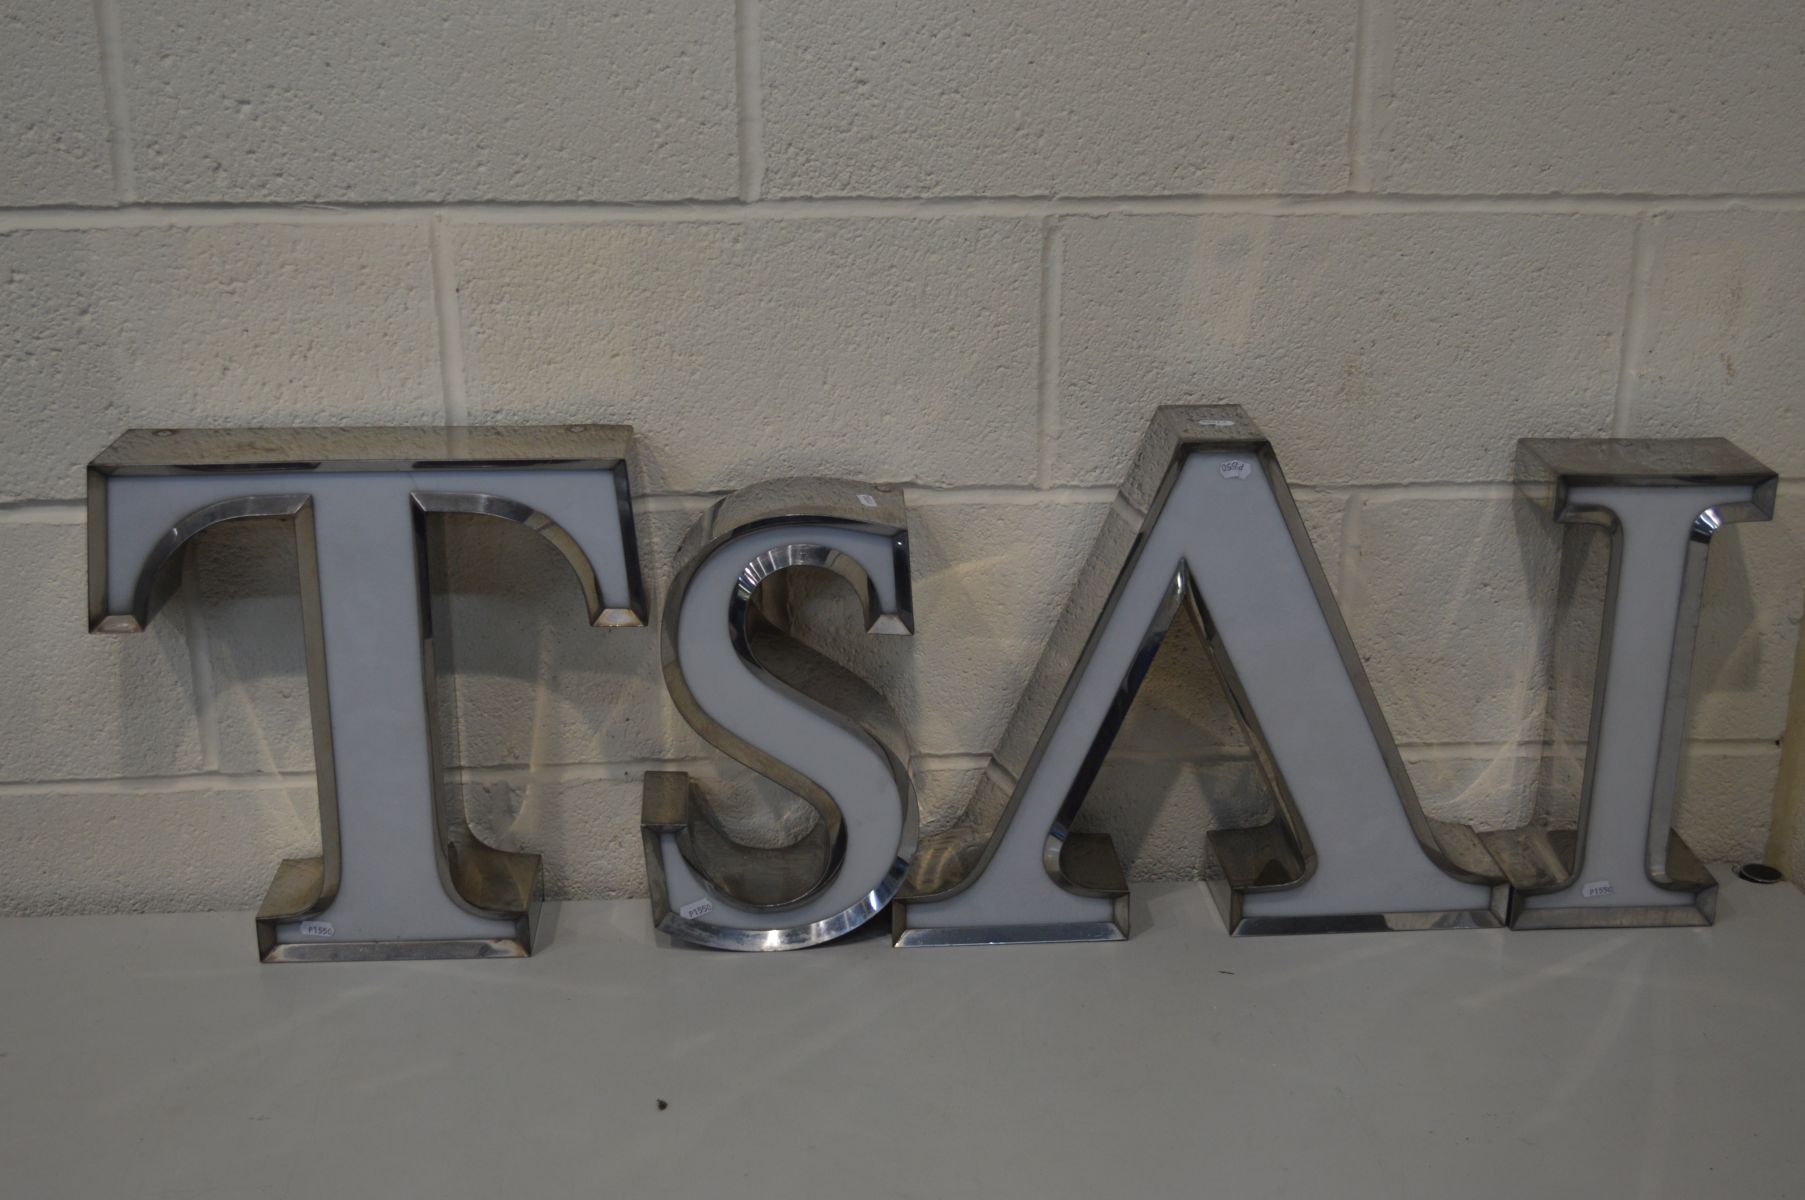 FOUR STAINLESS STEEL ADVERTISING LETTERS, include the letters T, S, A, I